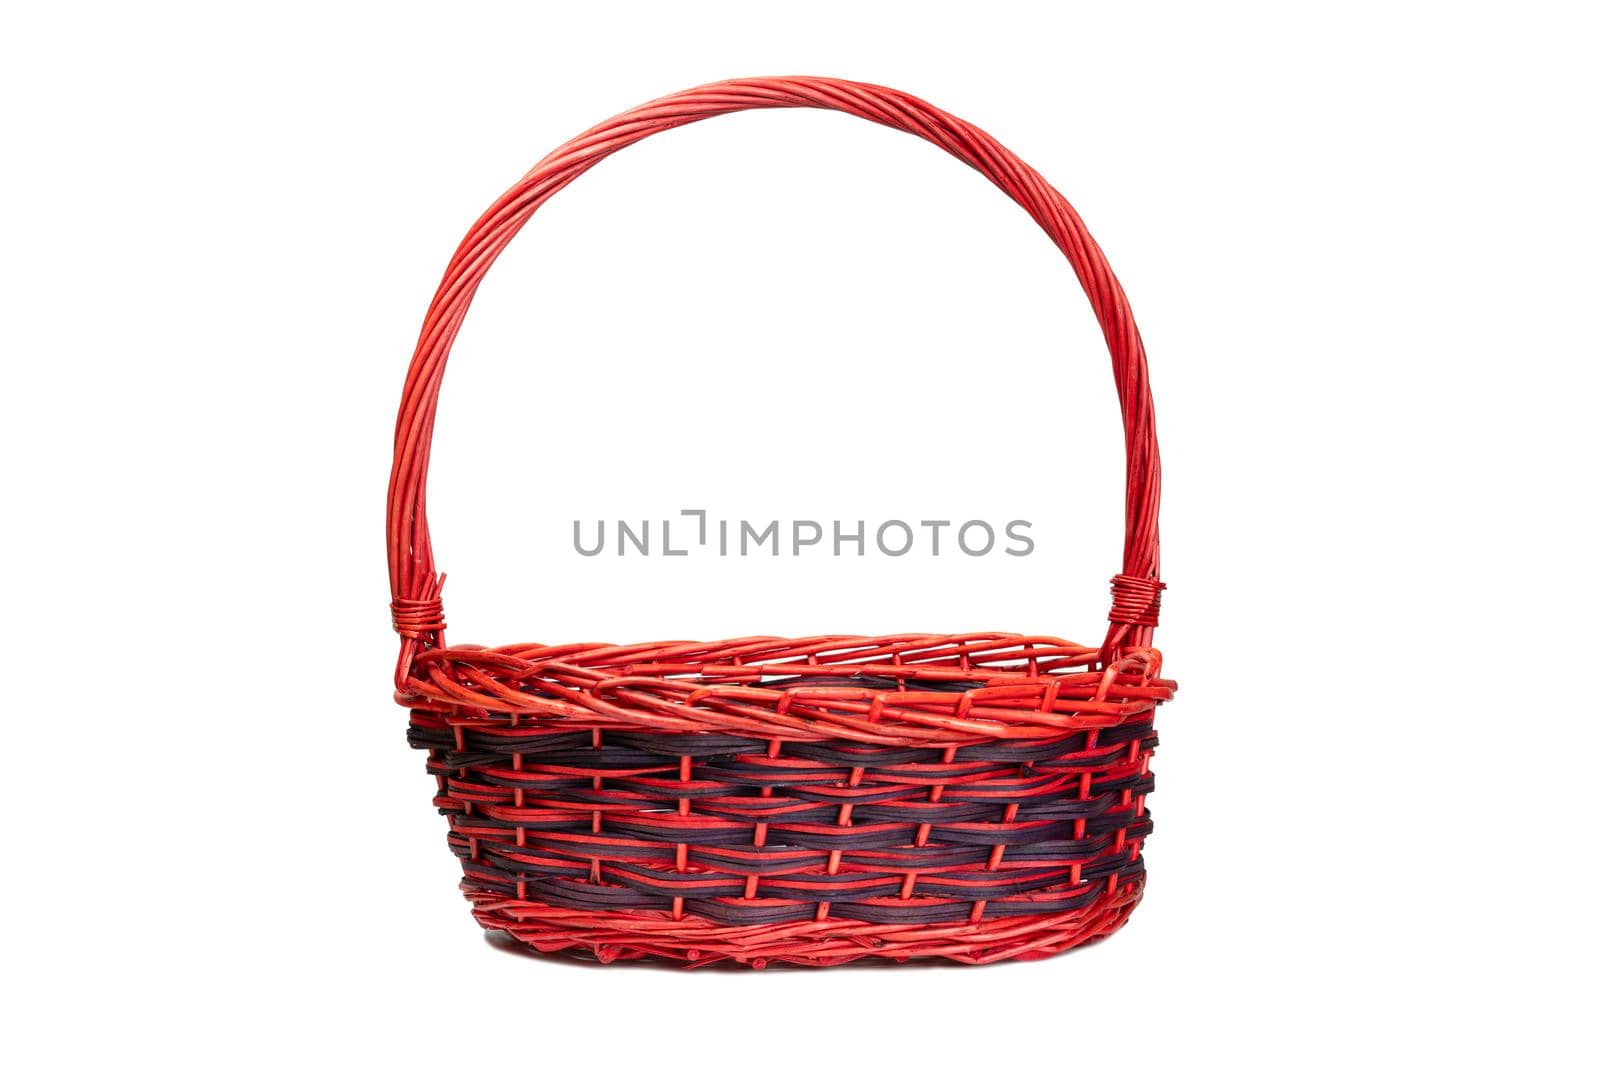 weave basket with clipping path on white background by Buttus_casso